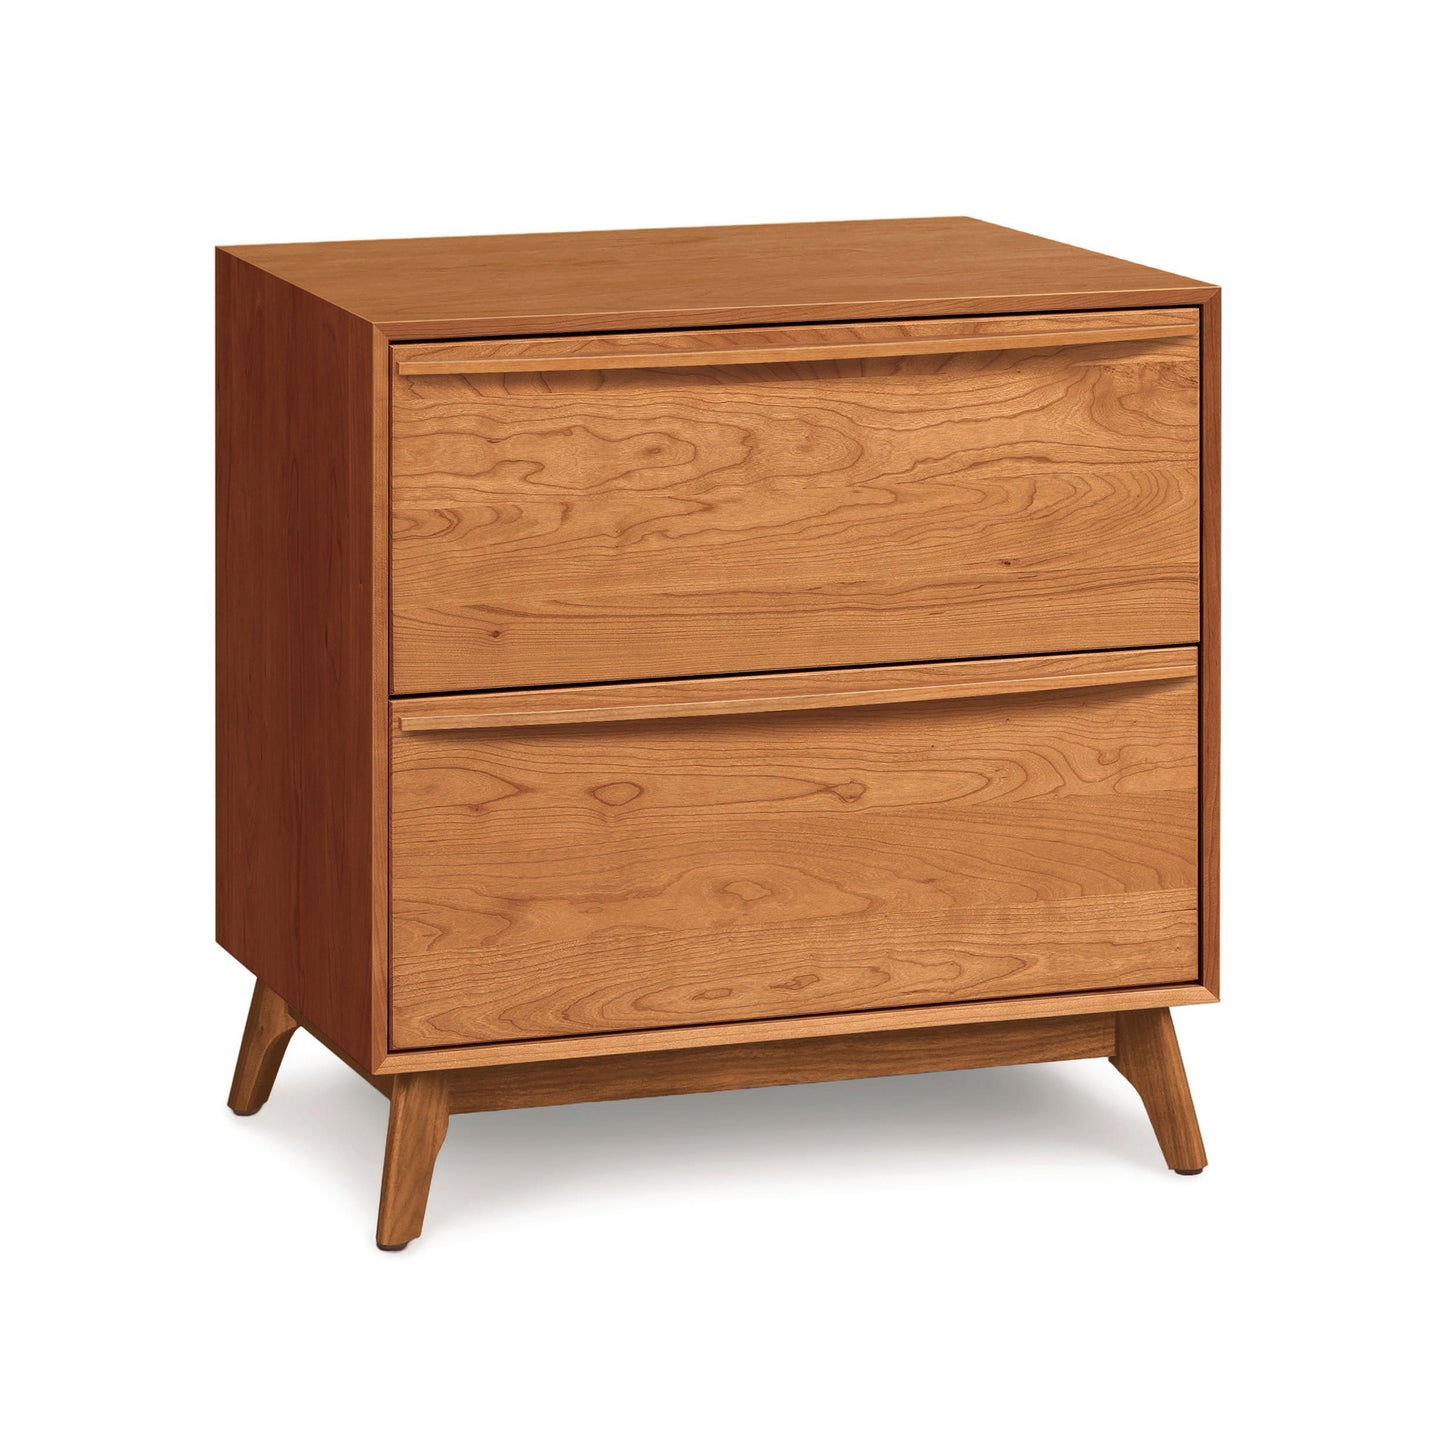 The Copeland Furniture Catalina 2-Drawer Nightstand is a contemporary style wooden nightstand, handmade in Bradford.